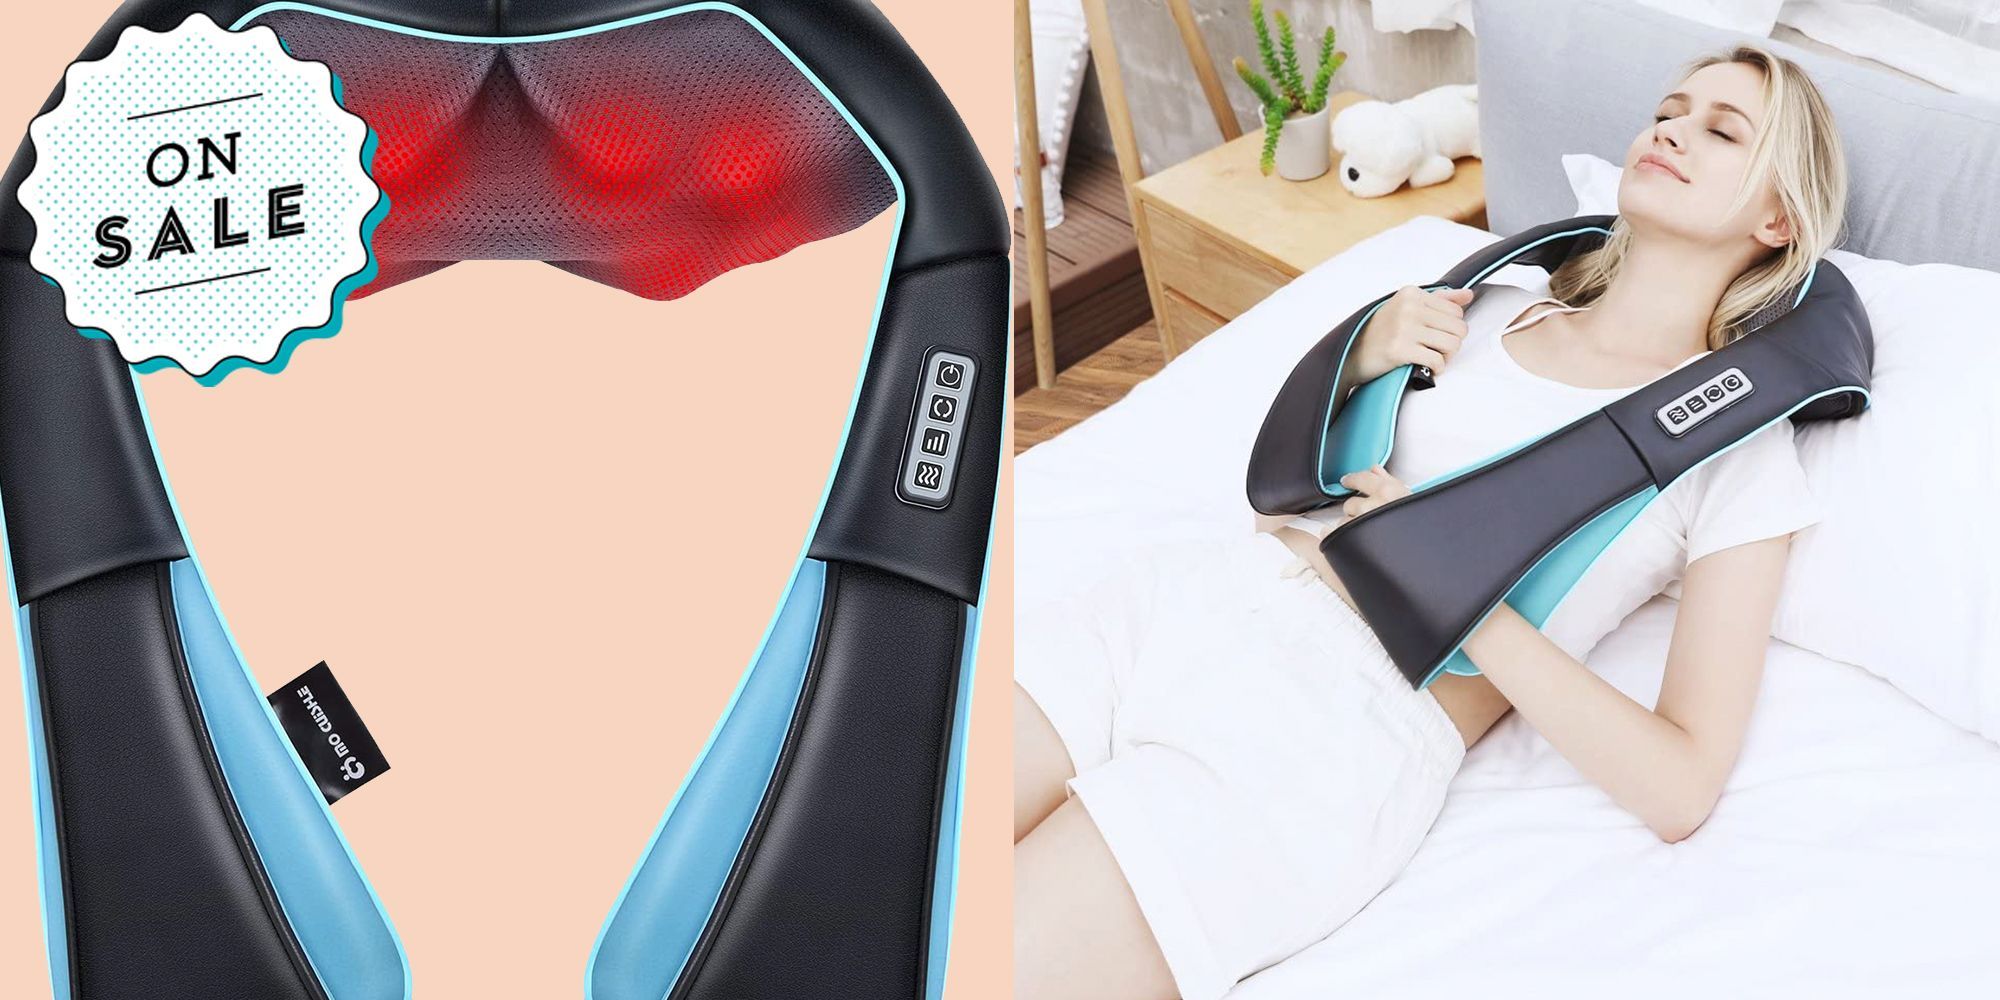  Neck Massager with Heat, Shiatsu Neck Back Massager - Mothers  Day Gifts for Mom Women, Presents for Boyfriend, Girlfriend - Fathers Gifts  for Dad, Grandpa, Men - Shoulder Massager for Muscle